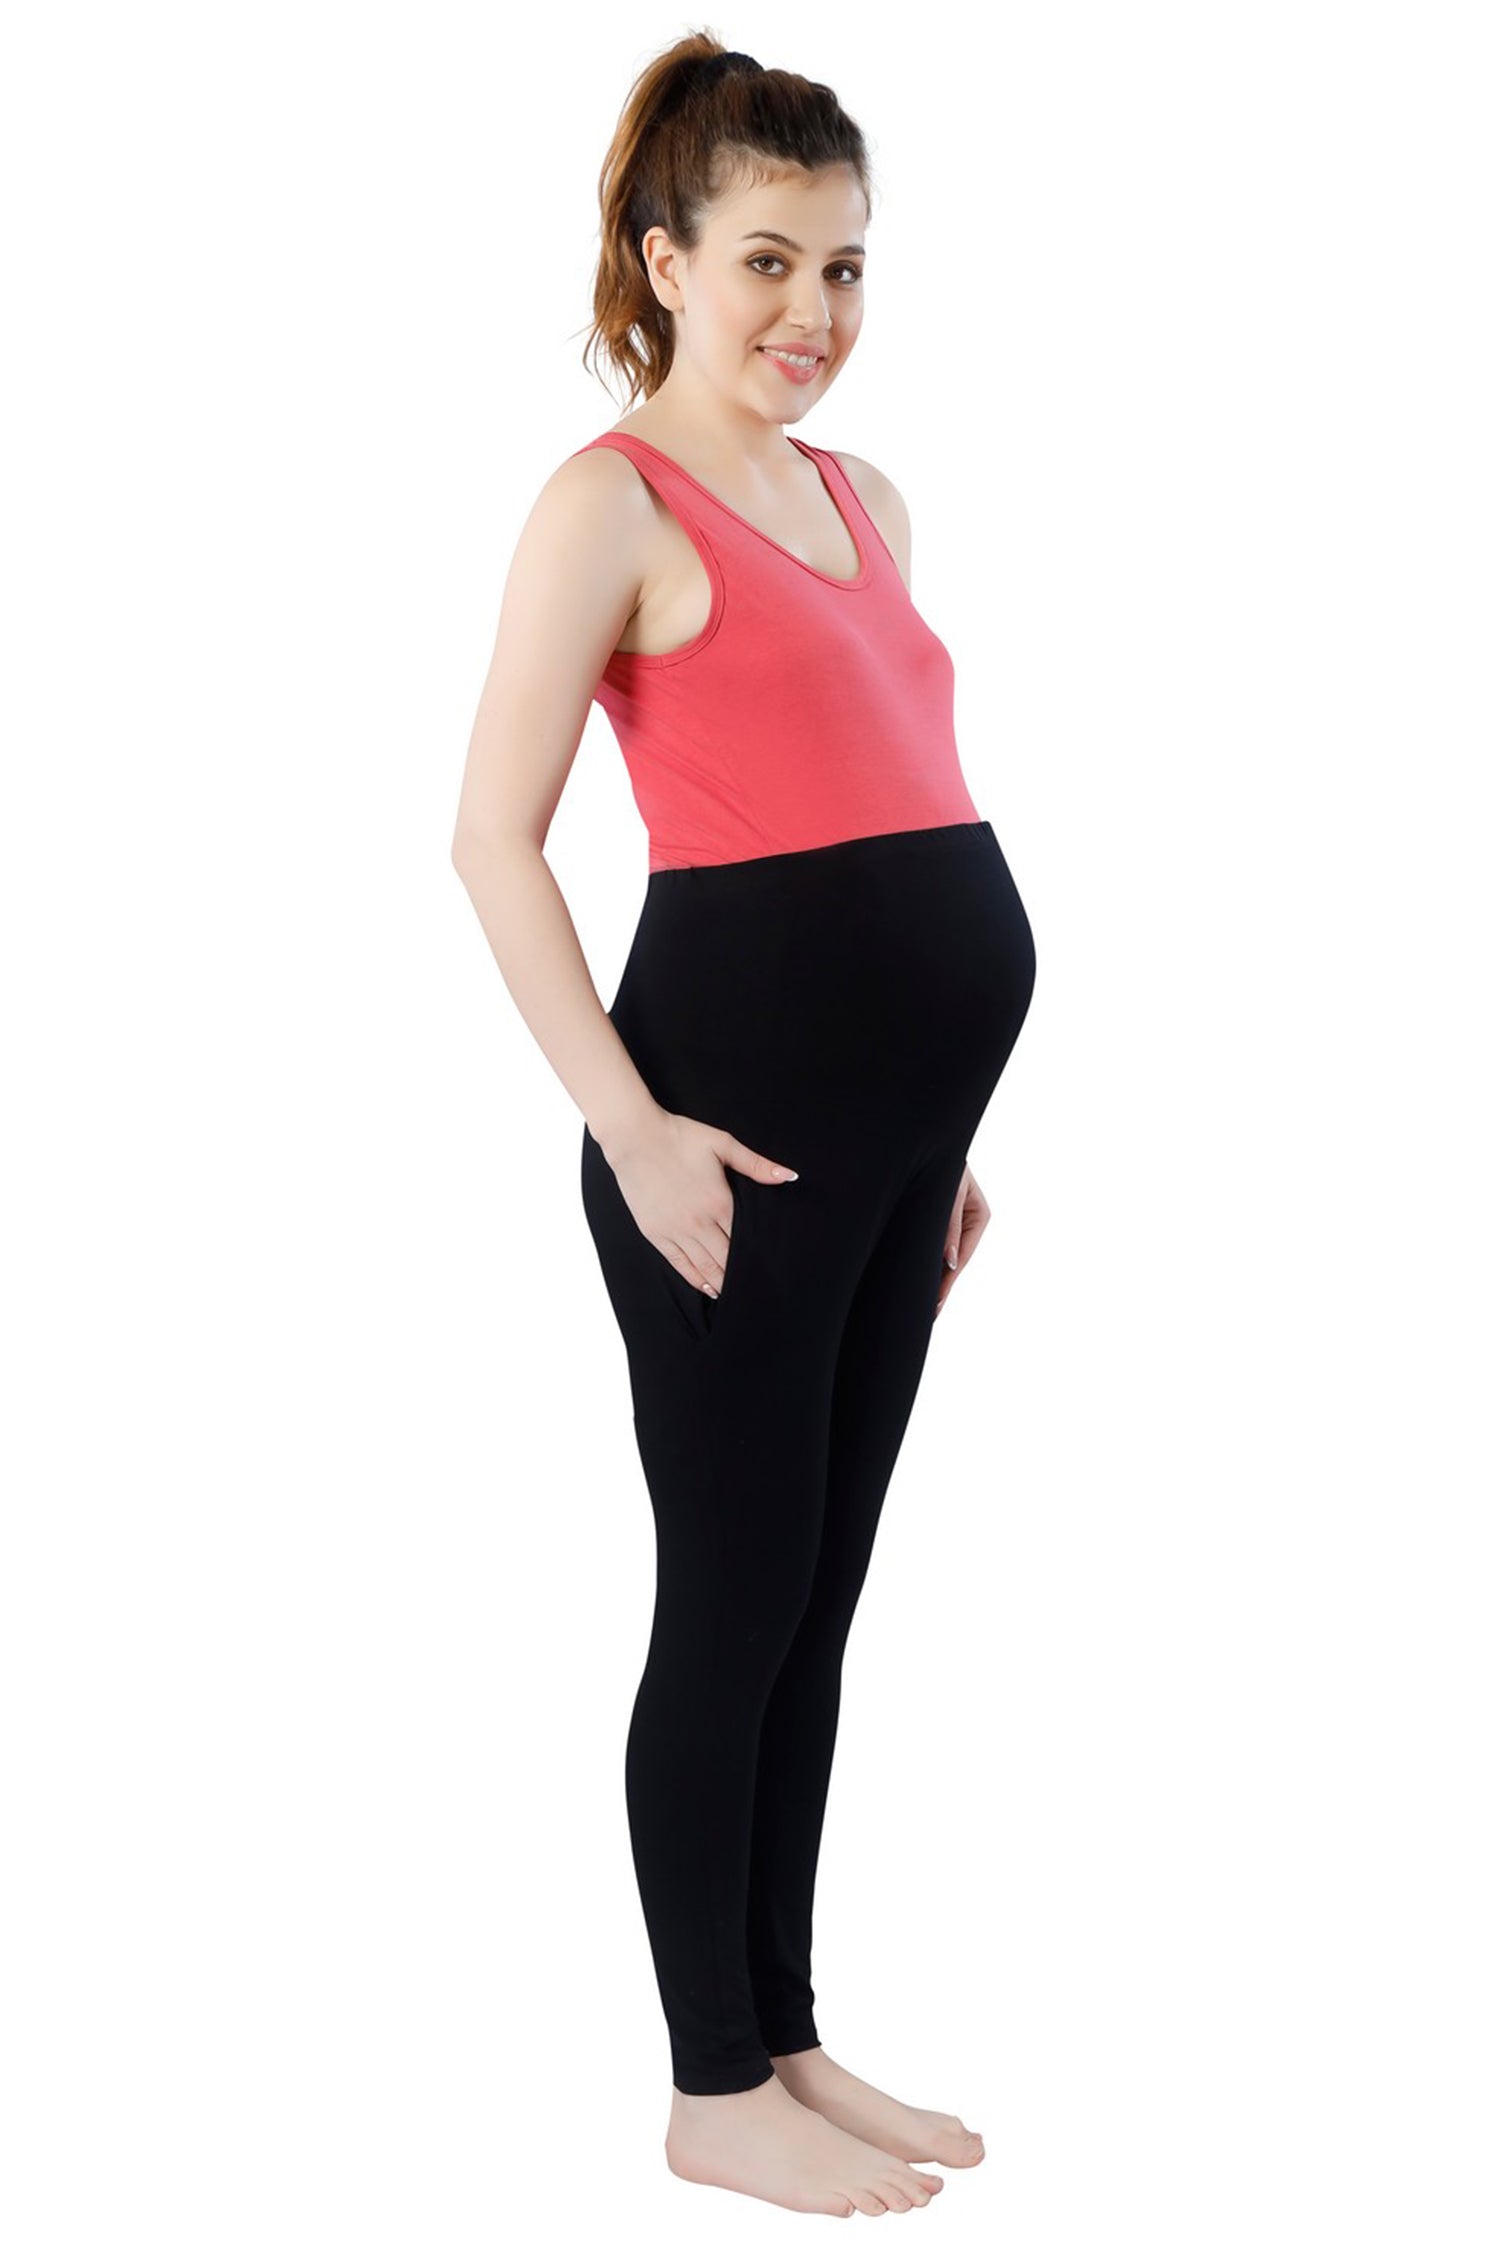 TRASA Women's Maternity Cotton Workout Leggings Over The Belly